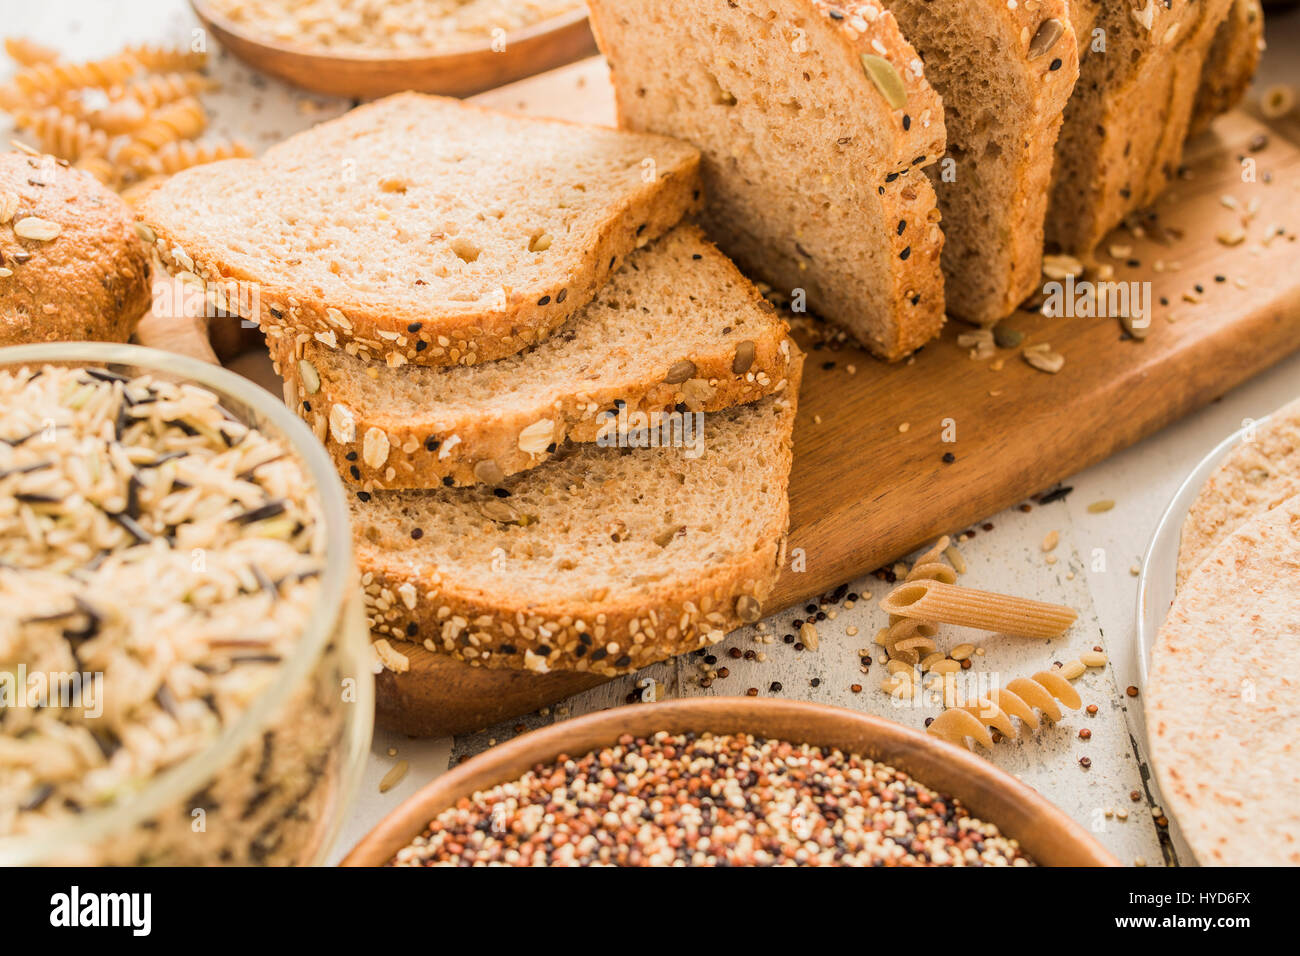 Sliced brown bread on cutting board Stock Photo